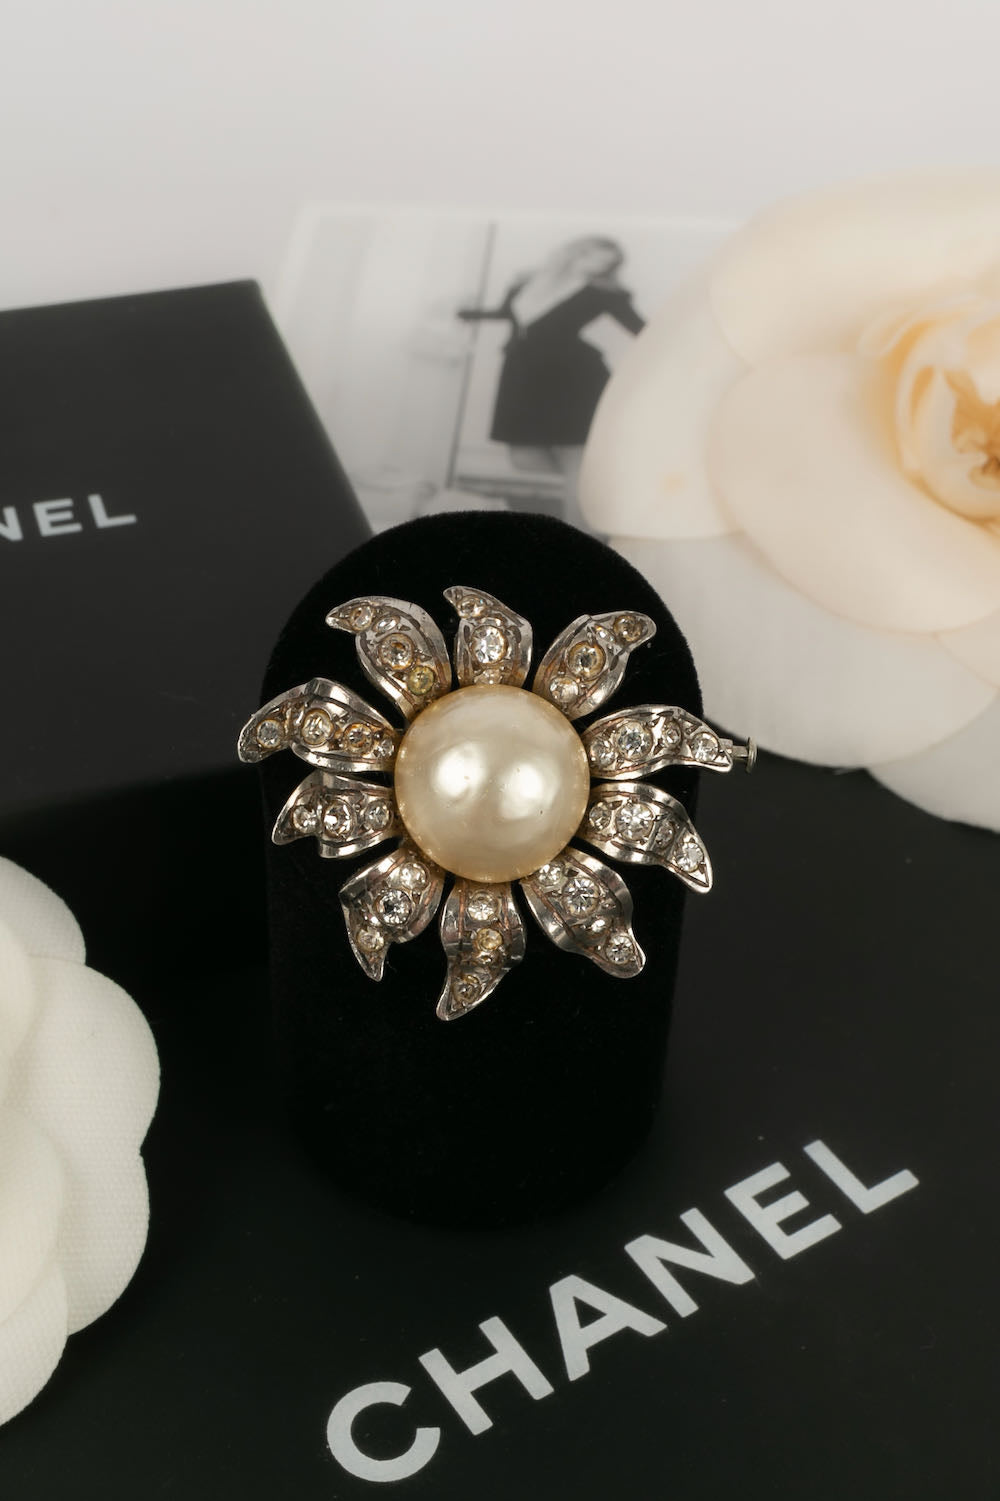 Chanel brooches 😍 pic by @st_alinaalina